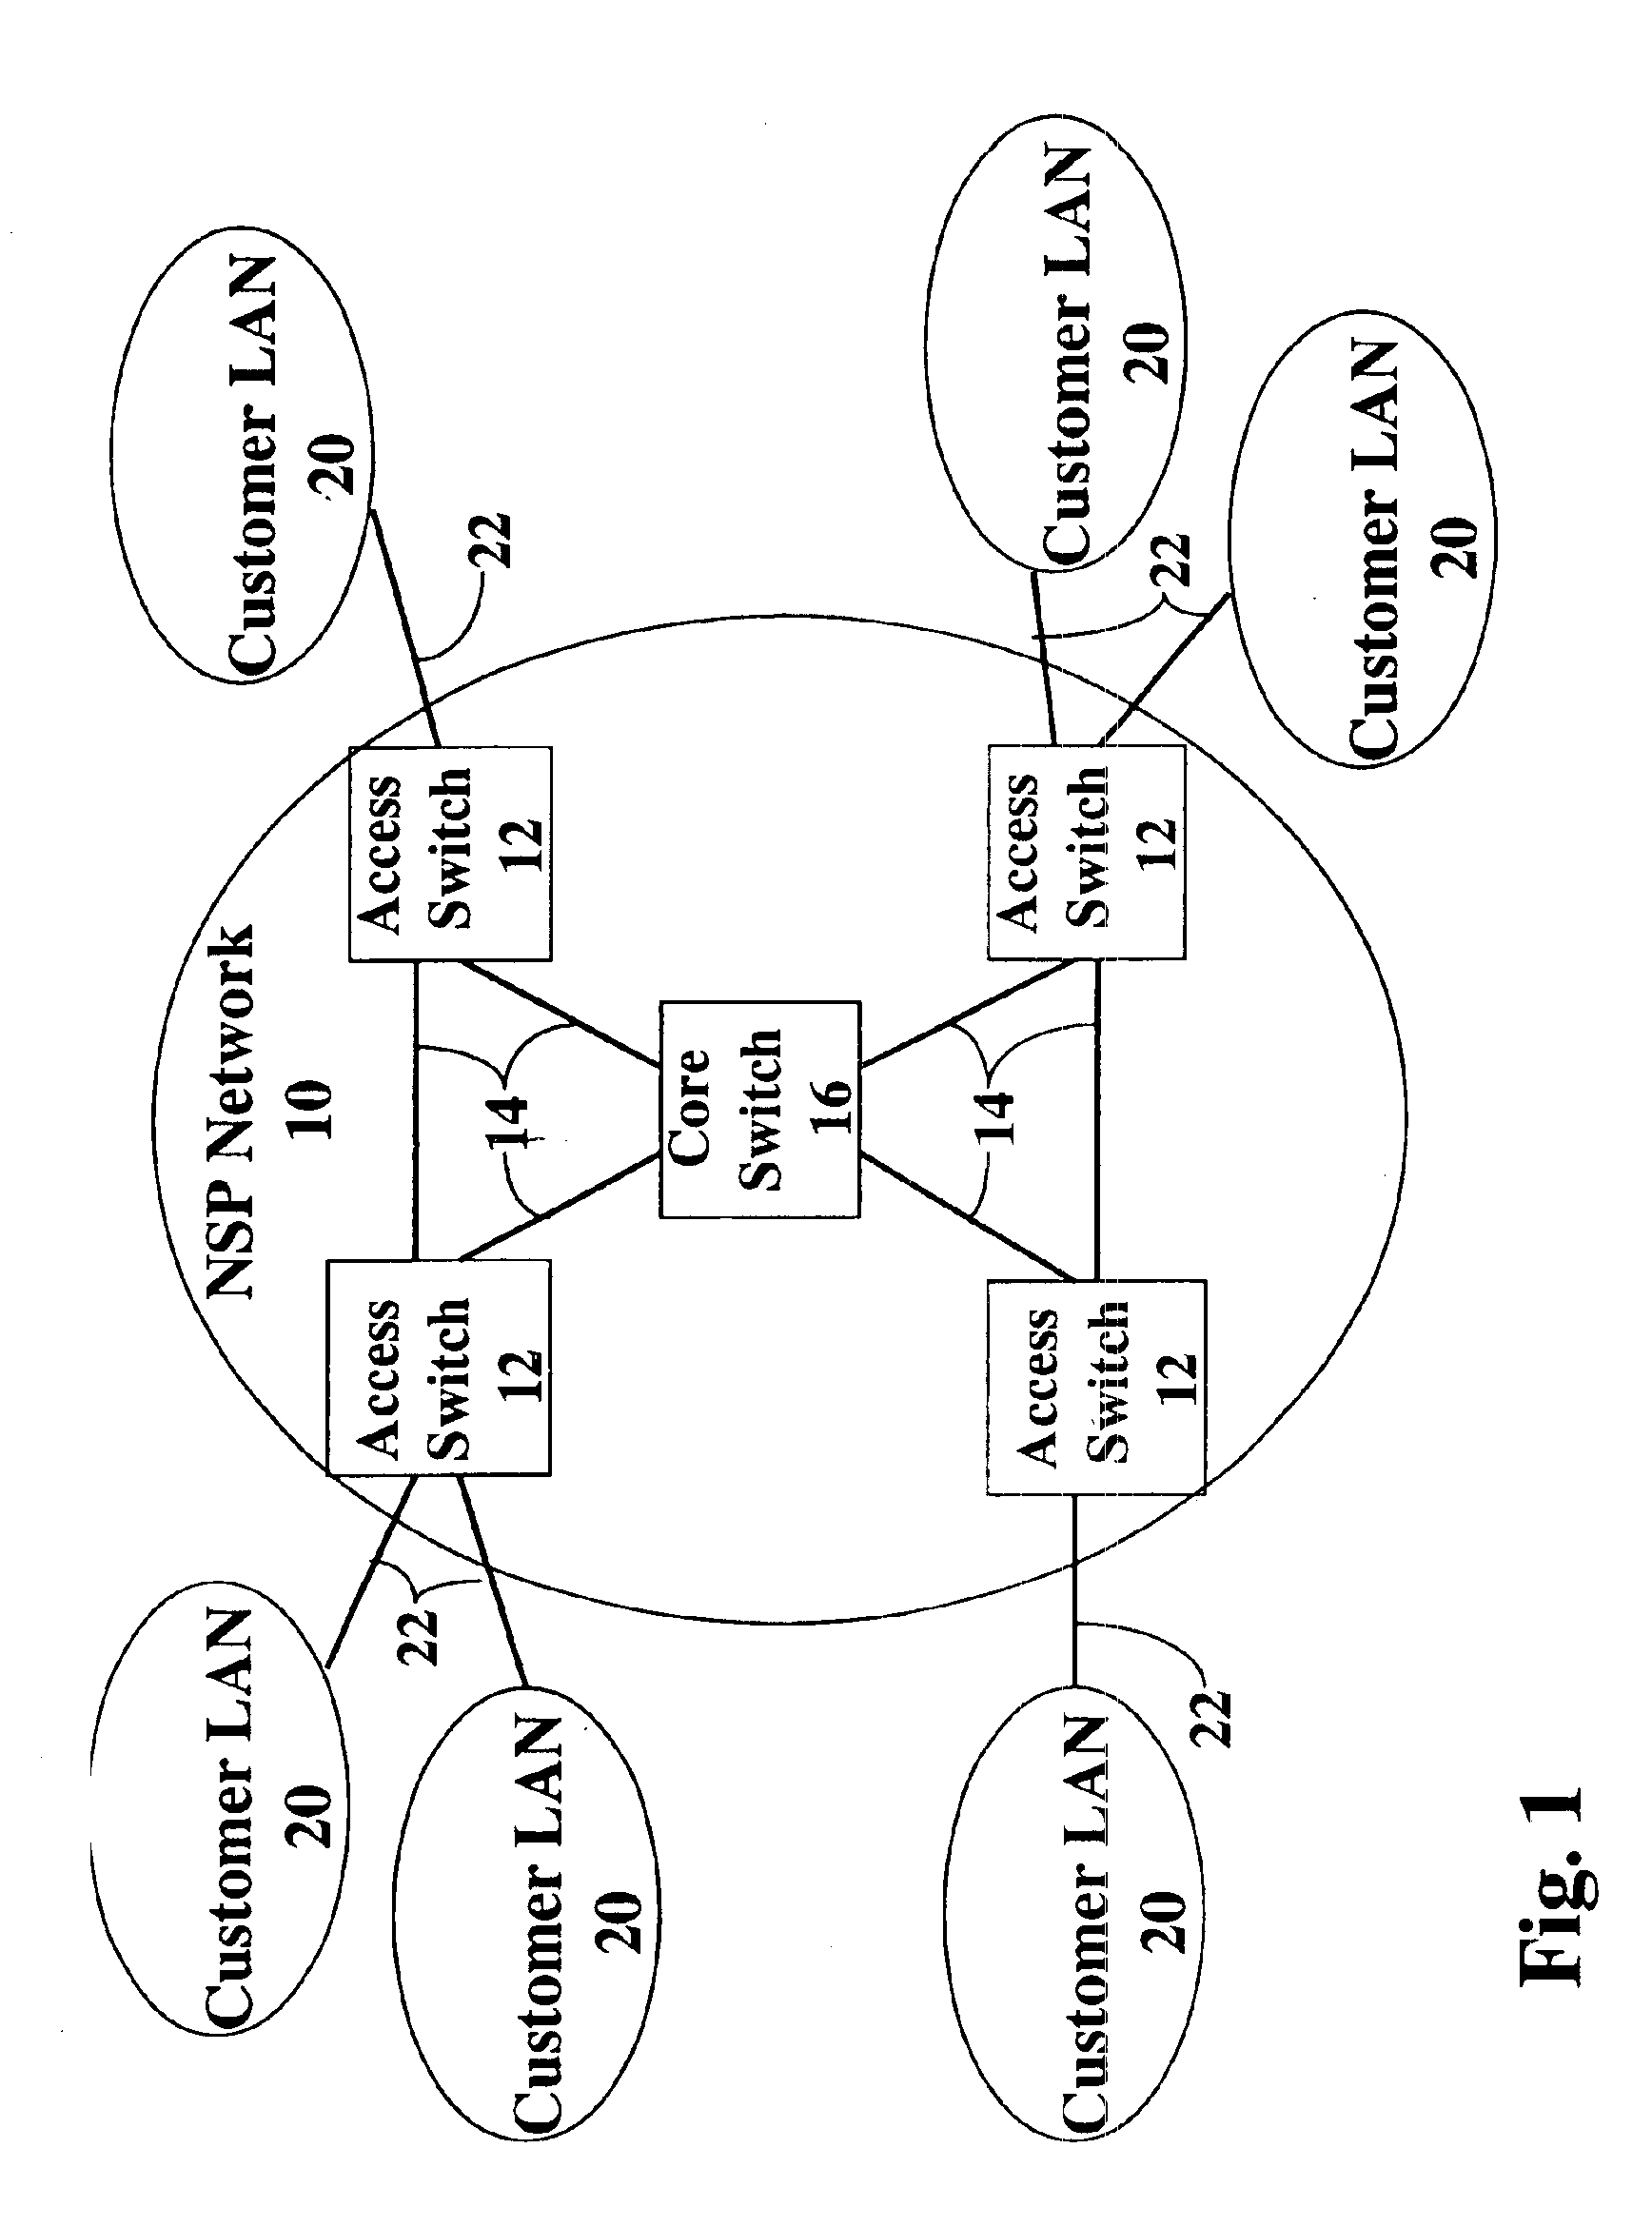 Virtual private networks and methods for their operation